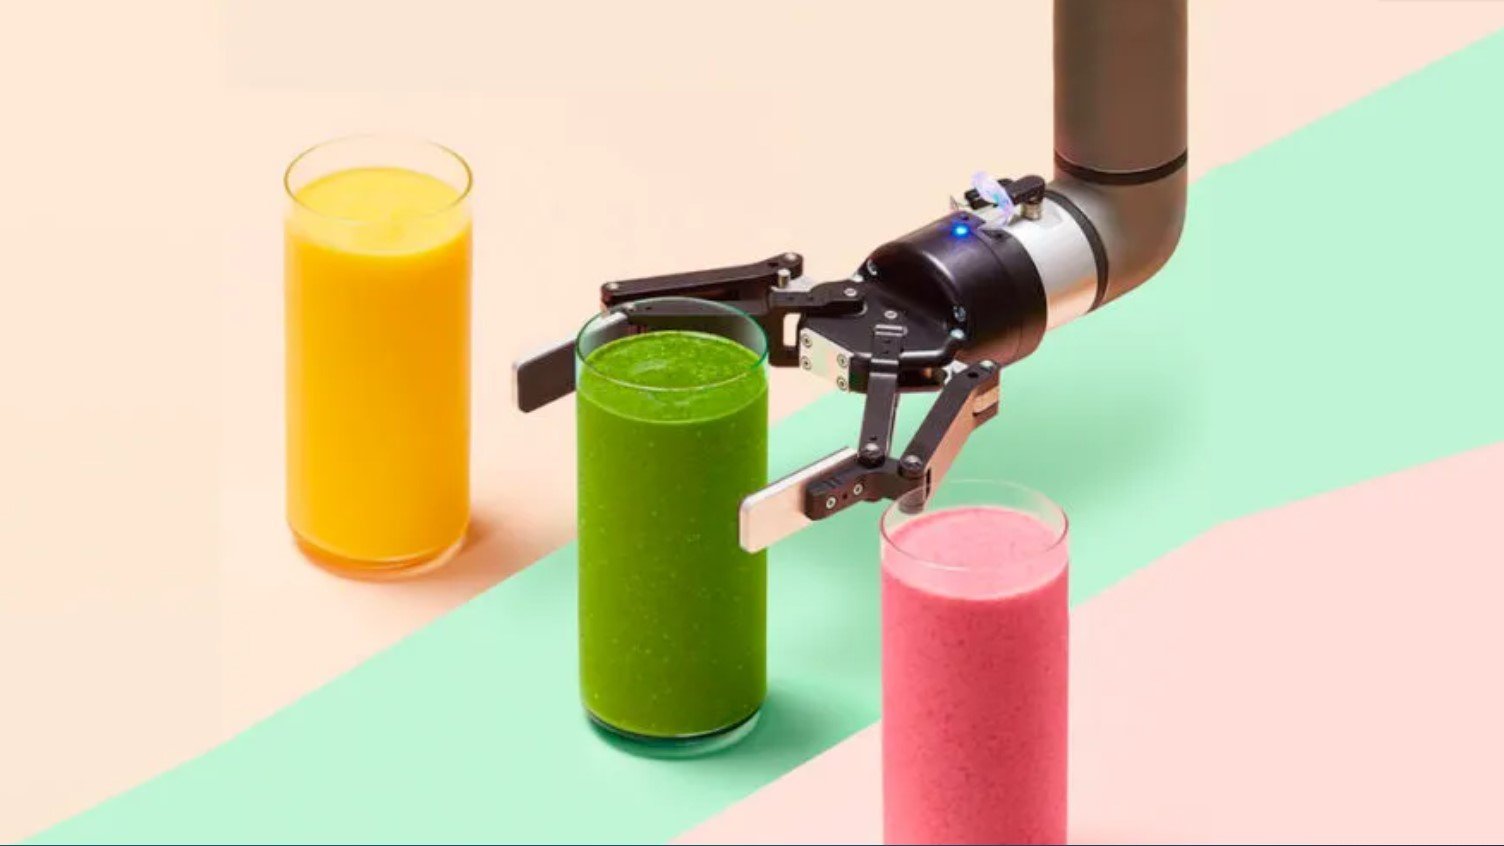 picutre of robot arm holding a glass